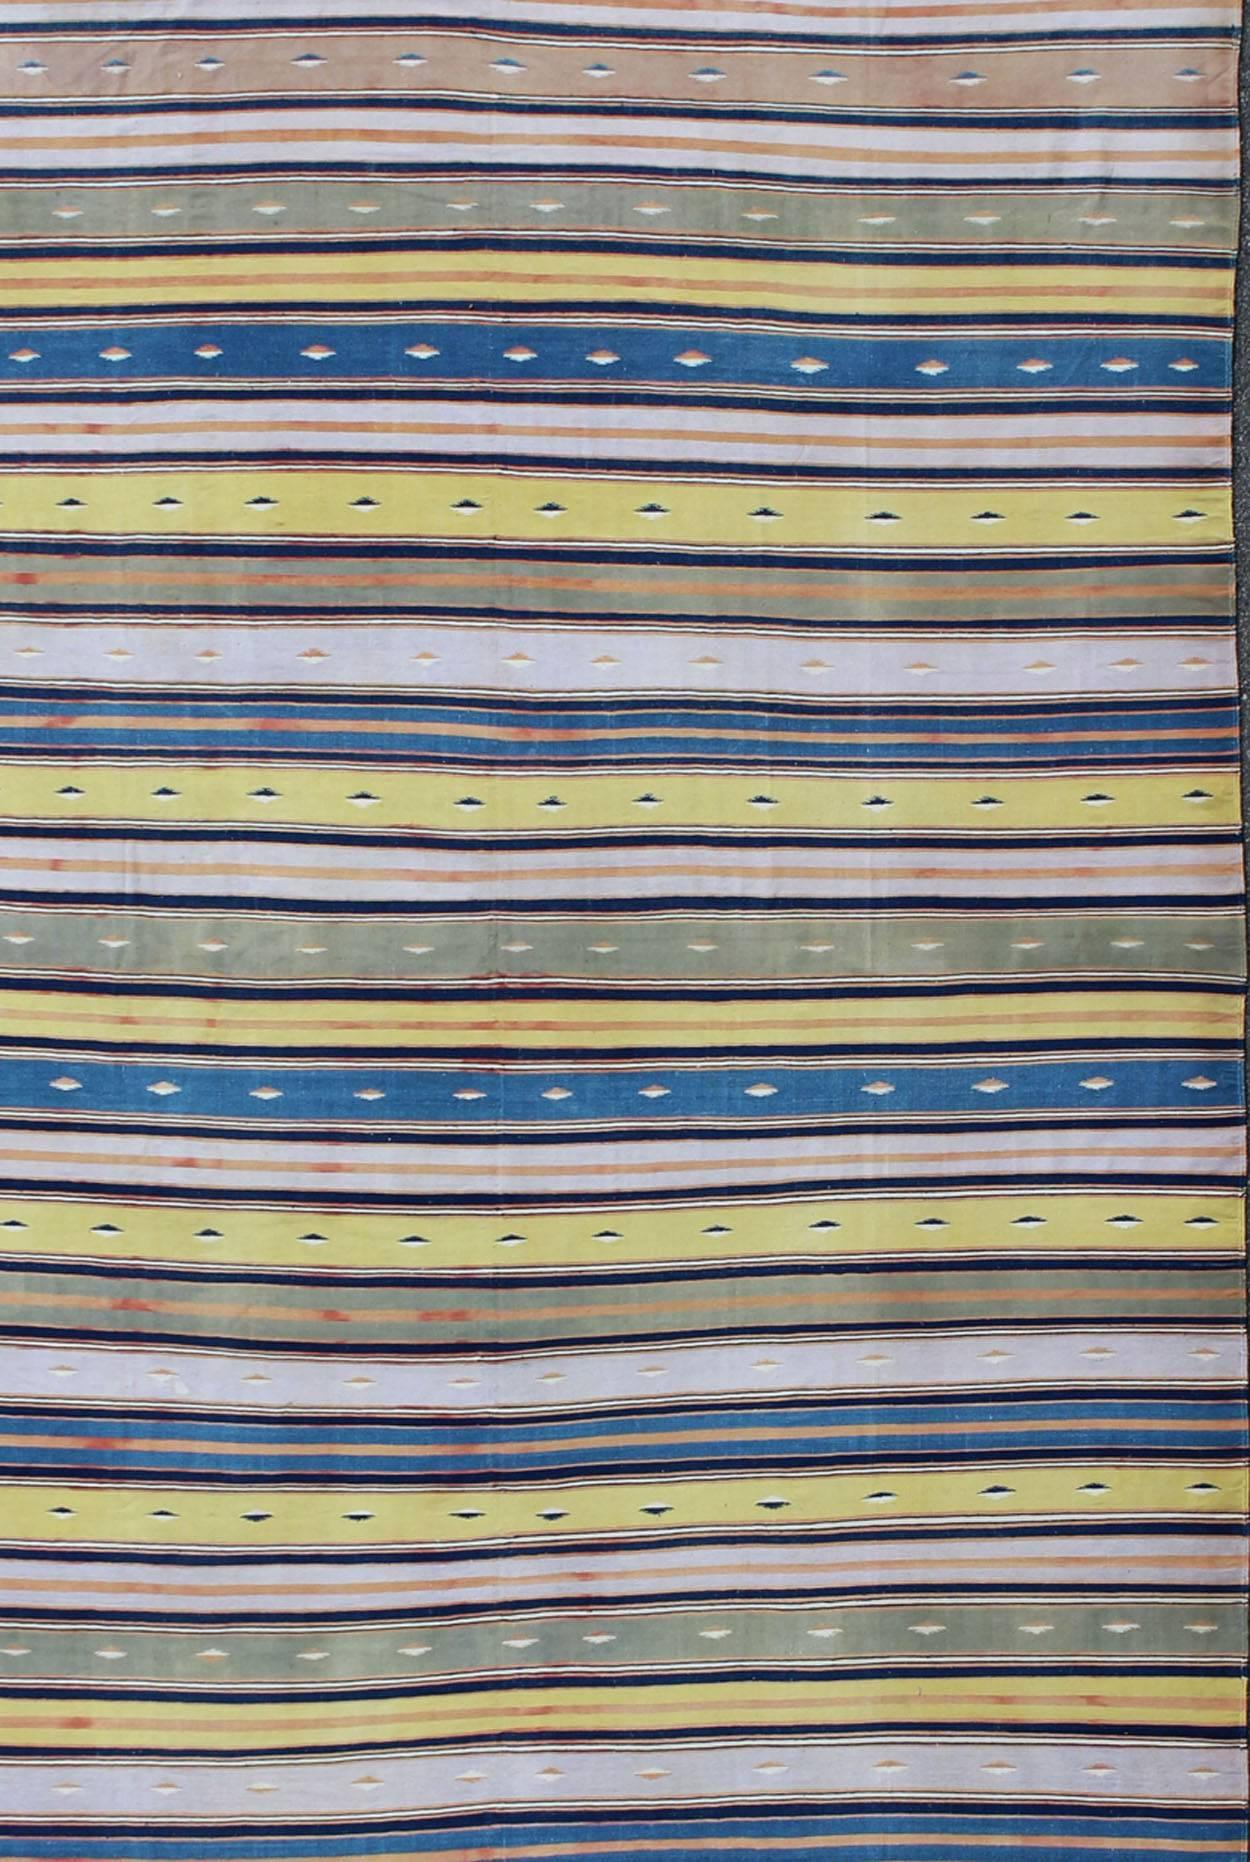 Long Vintage Cotton Dhurrie Rug with Stripe design in Blue, Yellow Green and Brown, 16-0910, Large vintage Dhurrie, Woven during the mid-20th century, this designer cotton Dhurrie is decorated with a stripe pattern rendered with an inventive